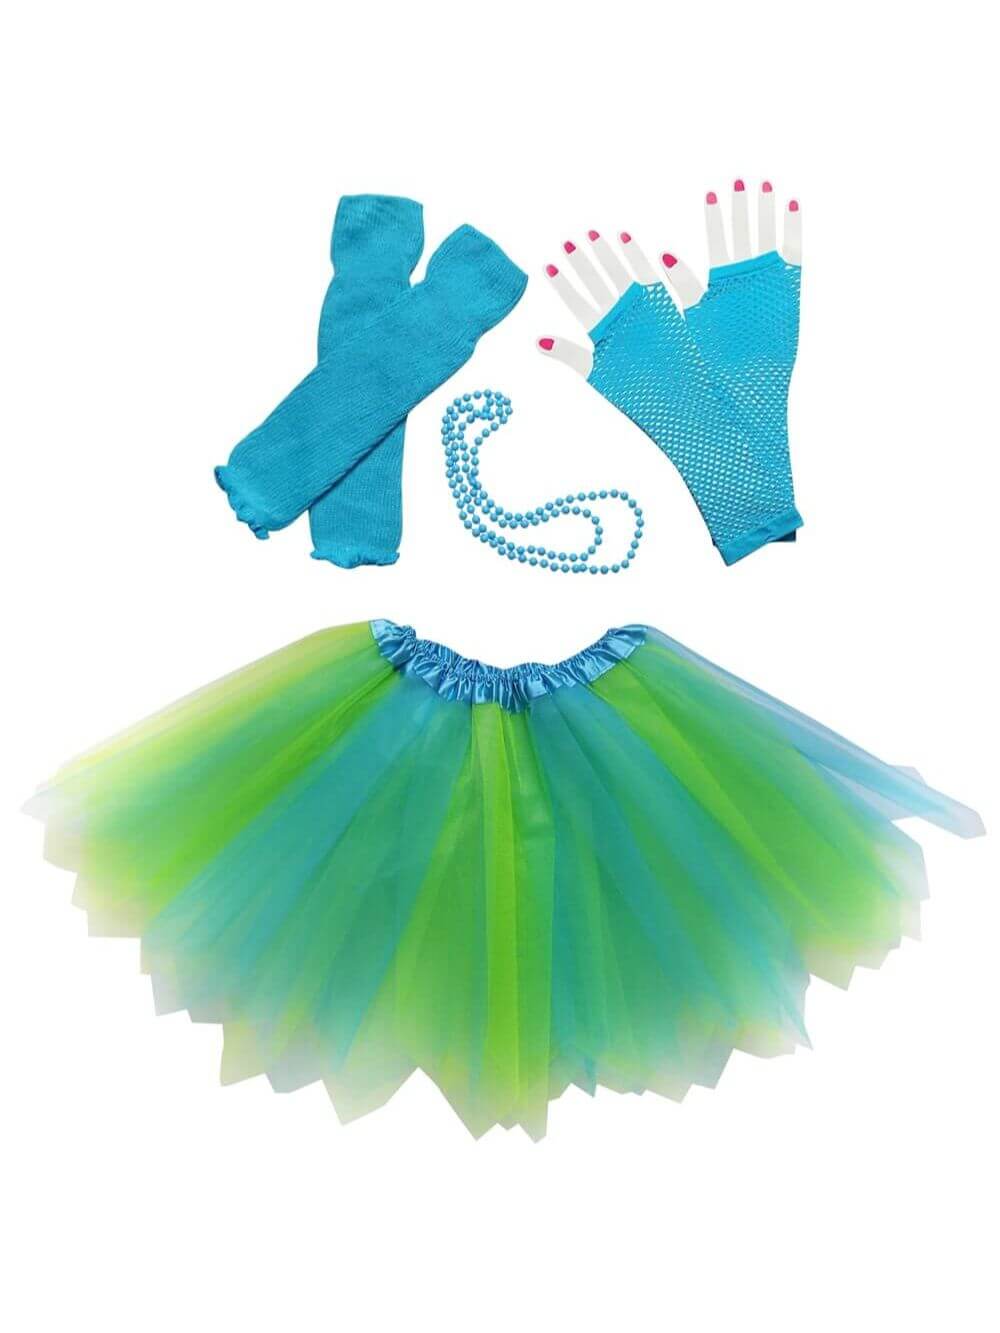 80s Costume in Neon Blue & Lime Green - 4 Piece Pixie Tutu Set for Girls, Adult, & Plus Sizes - Sydney So Sweet